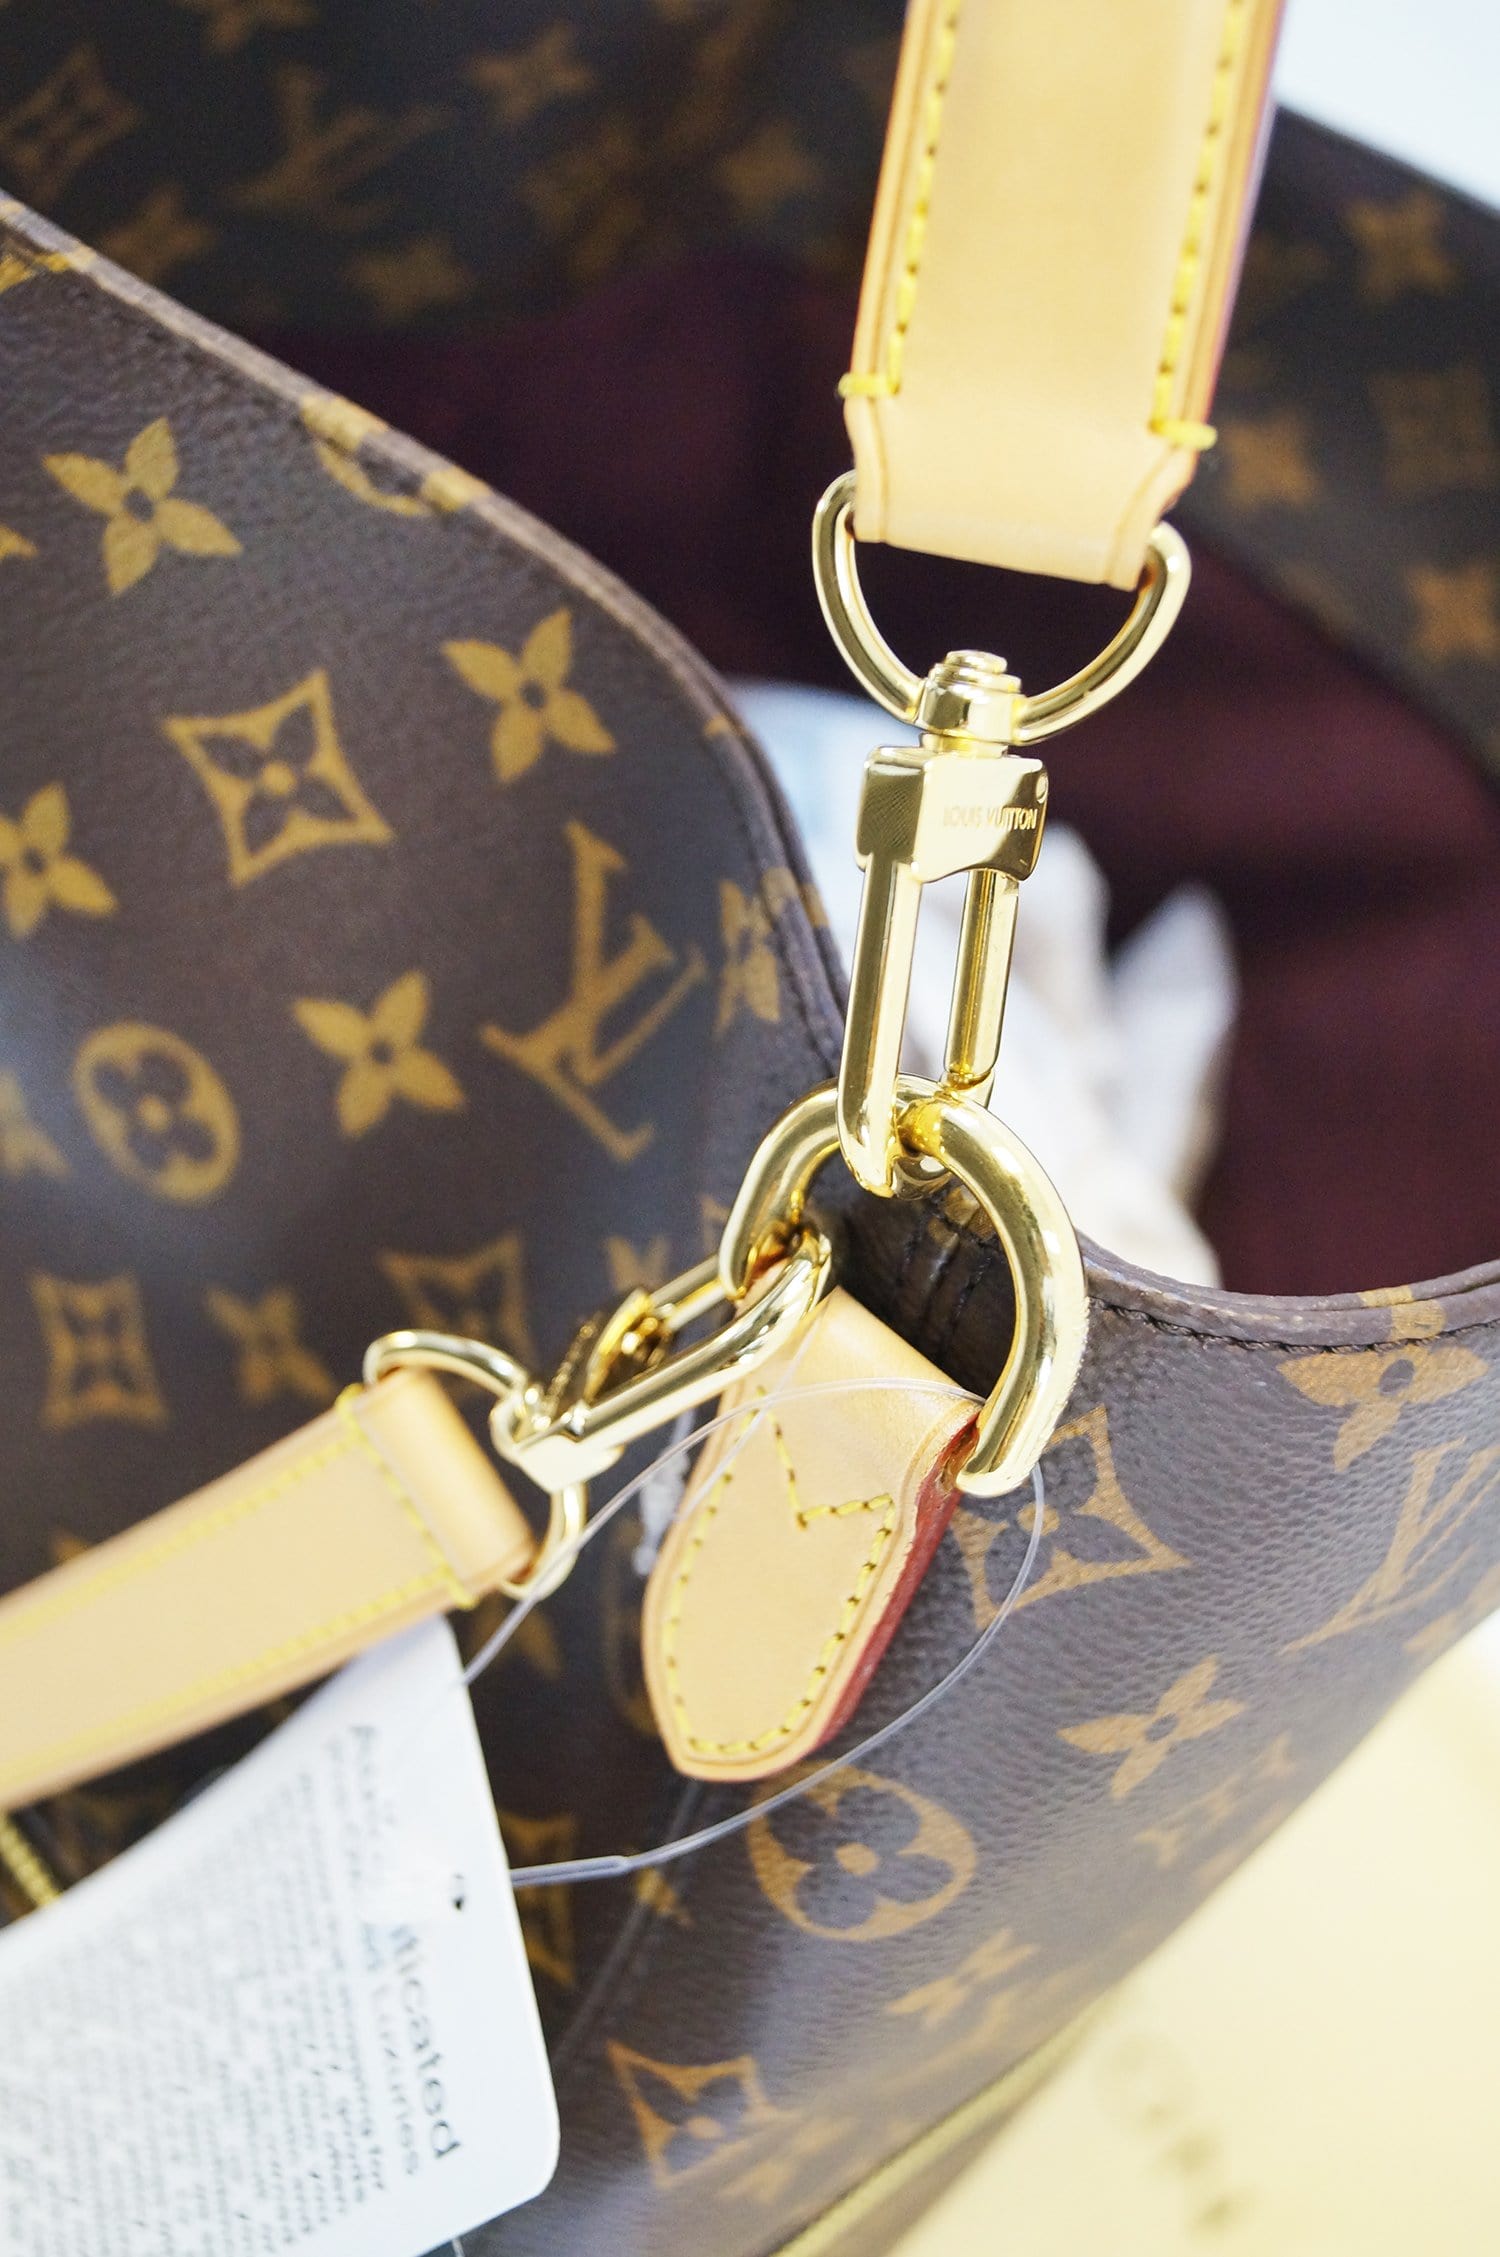 LV Melie MNG M41544 A fresh take on the hobo, the new Mélie is a must-have  addition to fashion-forward wardrobes. Lig…